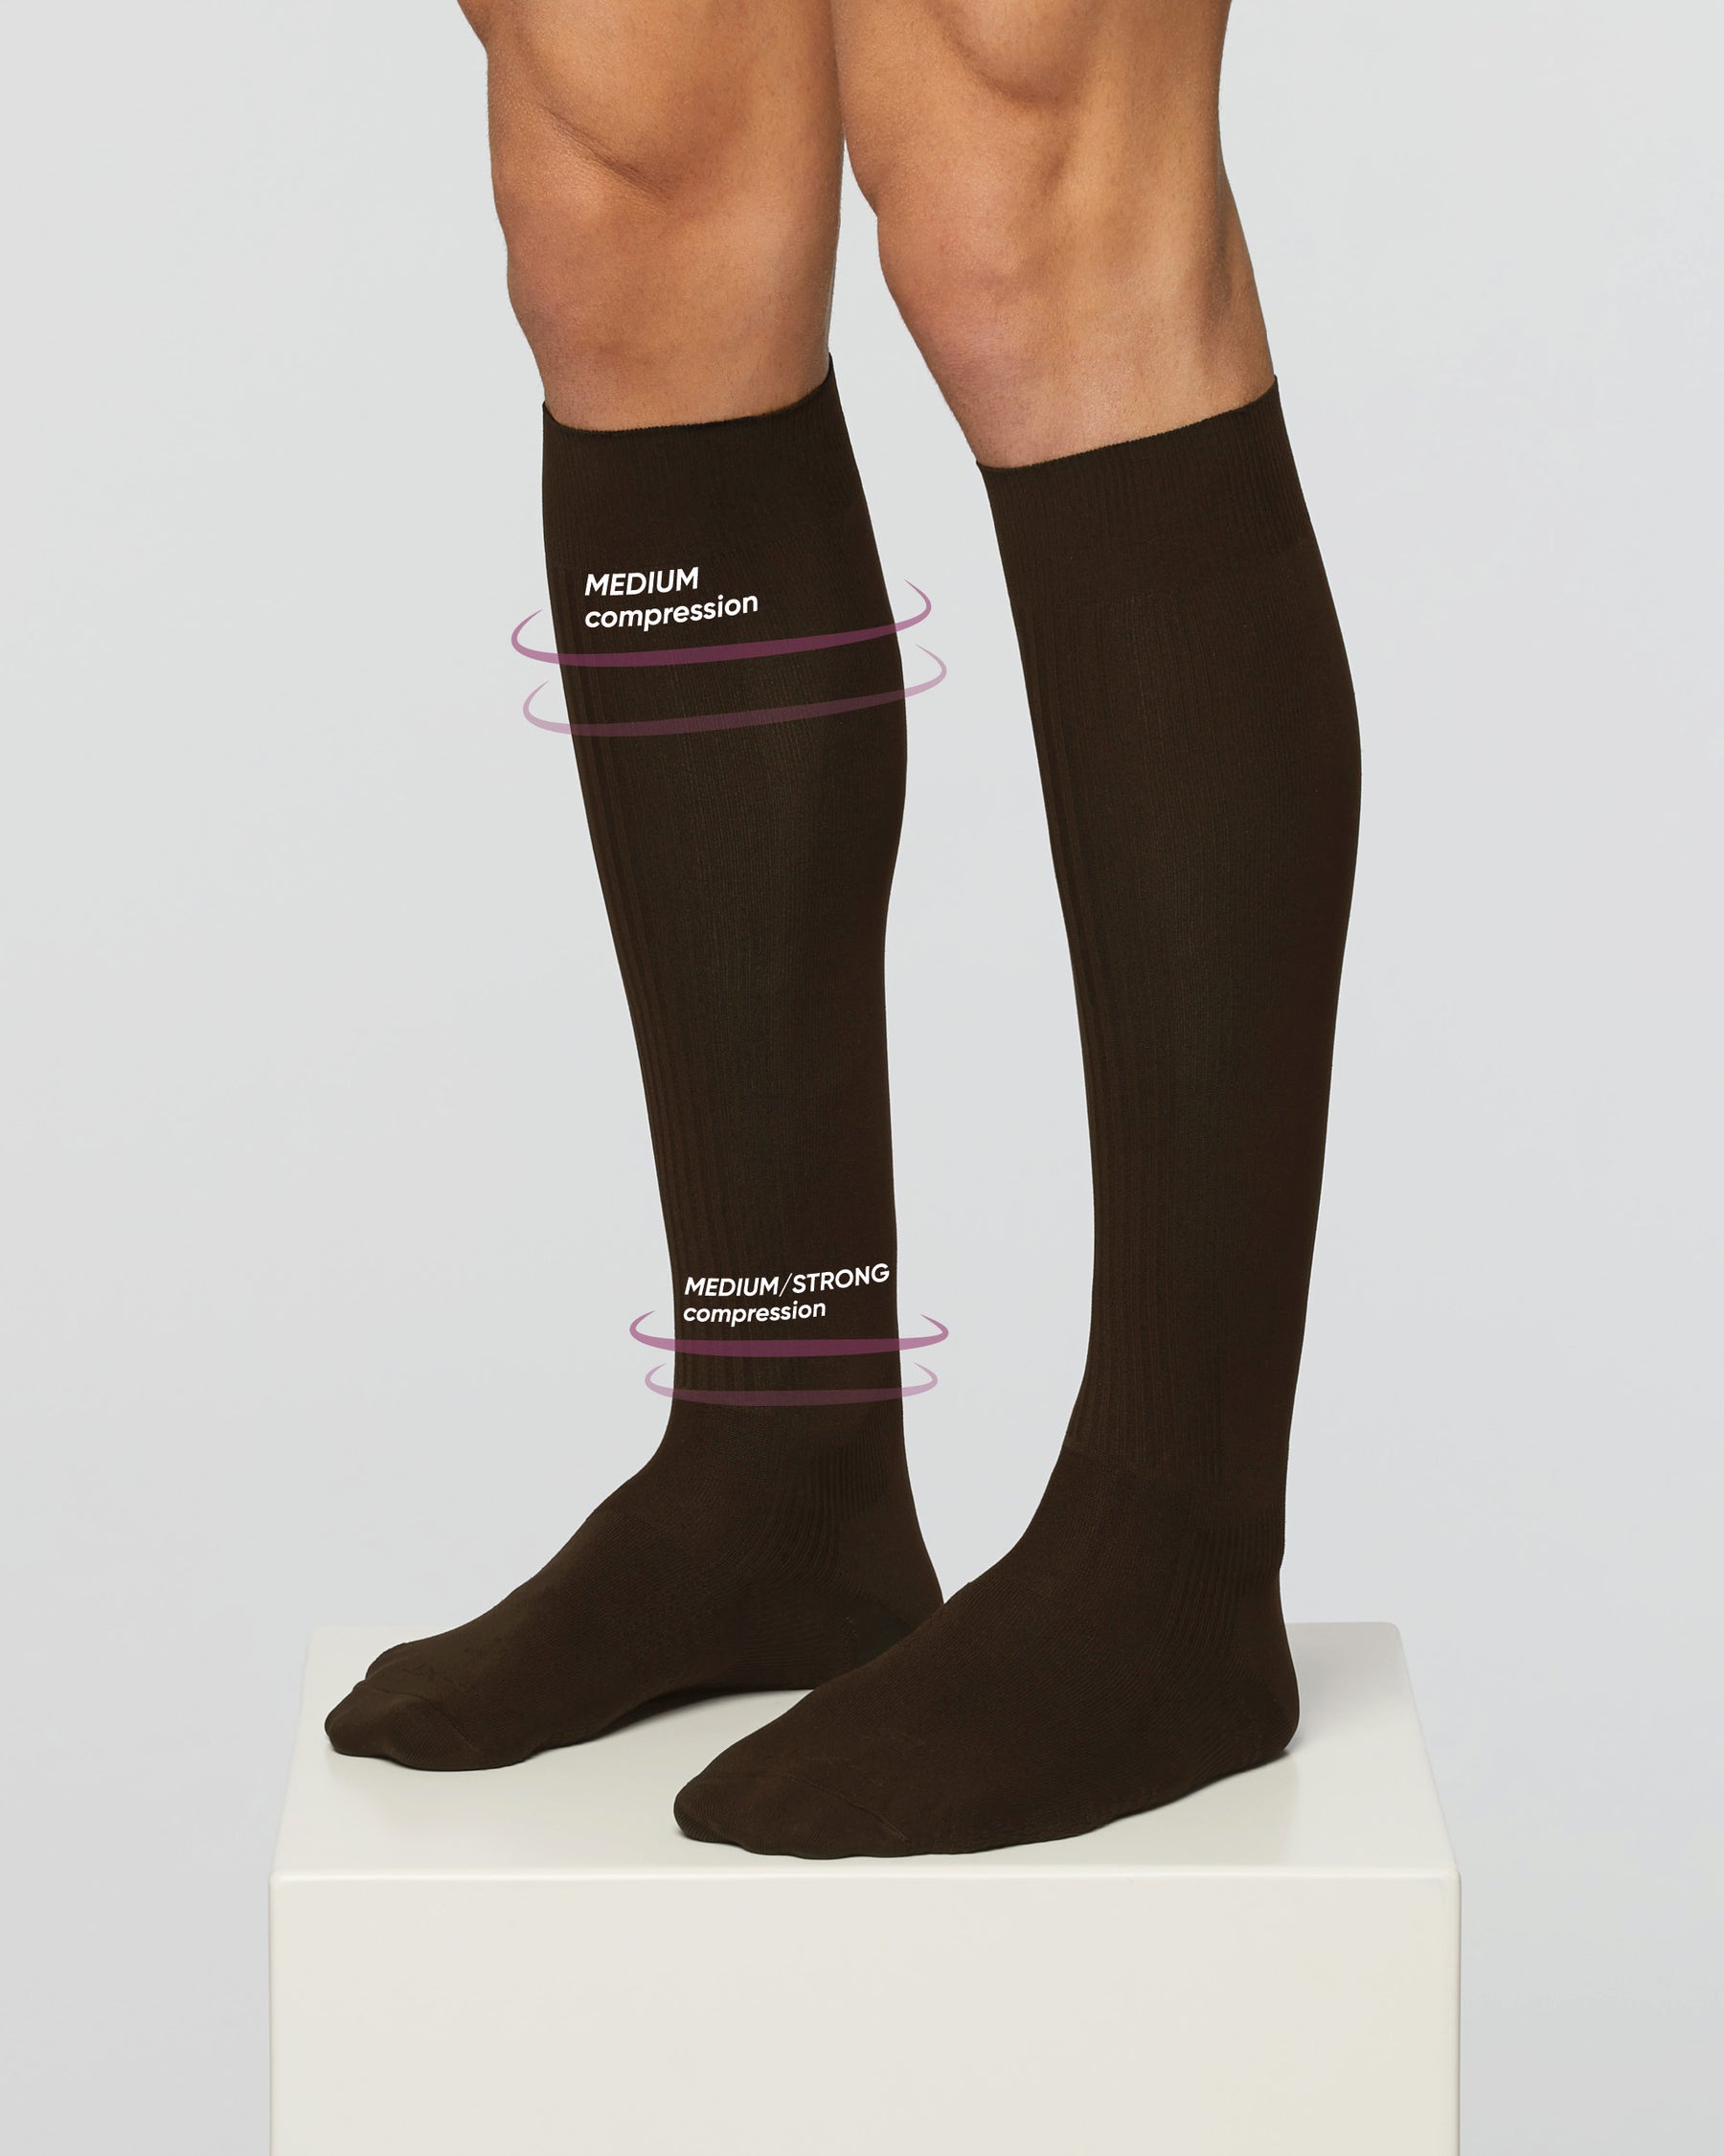 Relaxing 70 denier sock with medium graduated compression